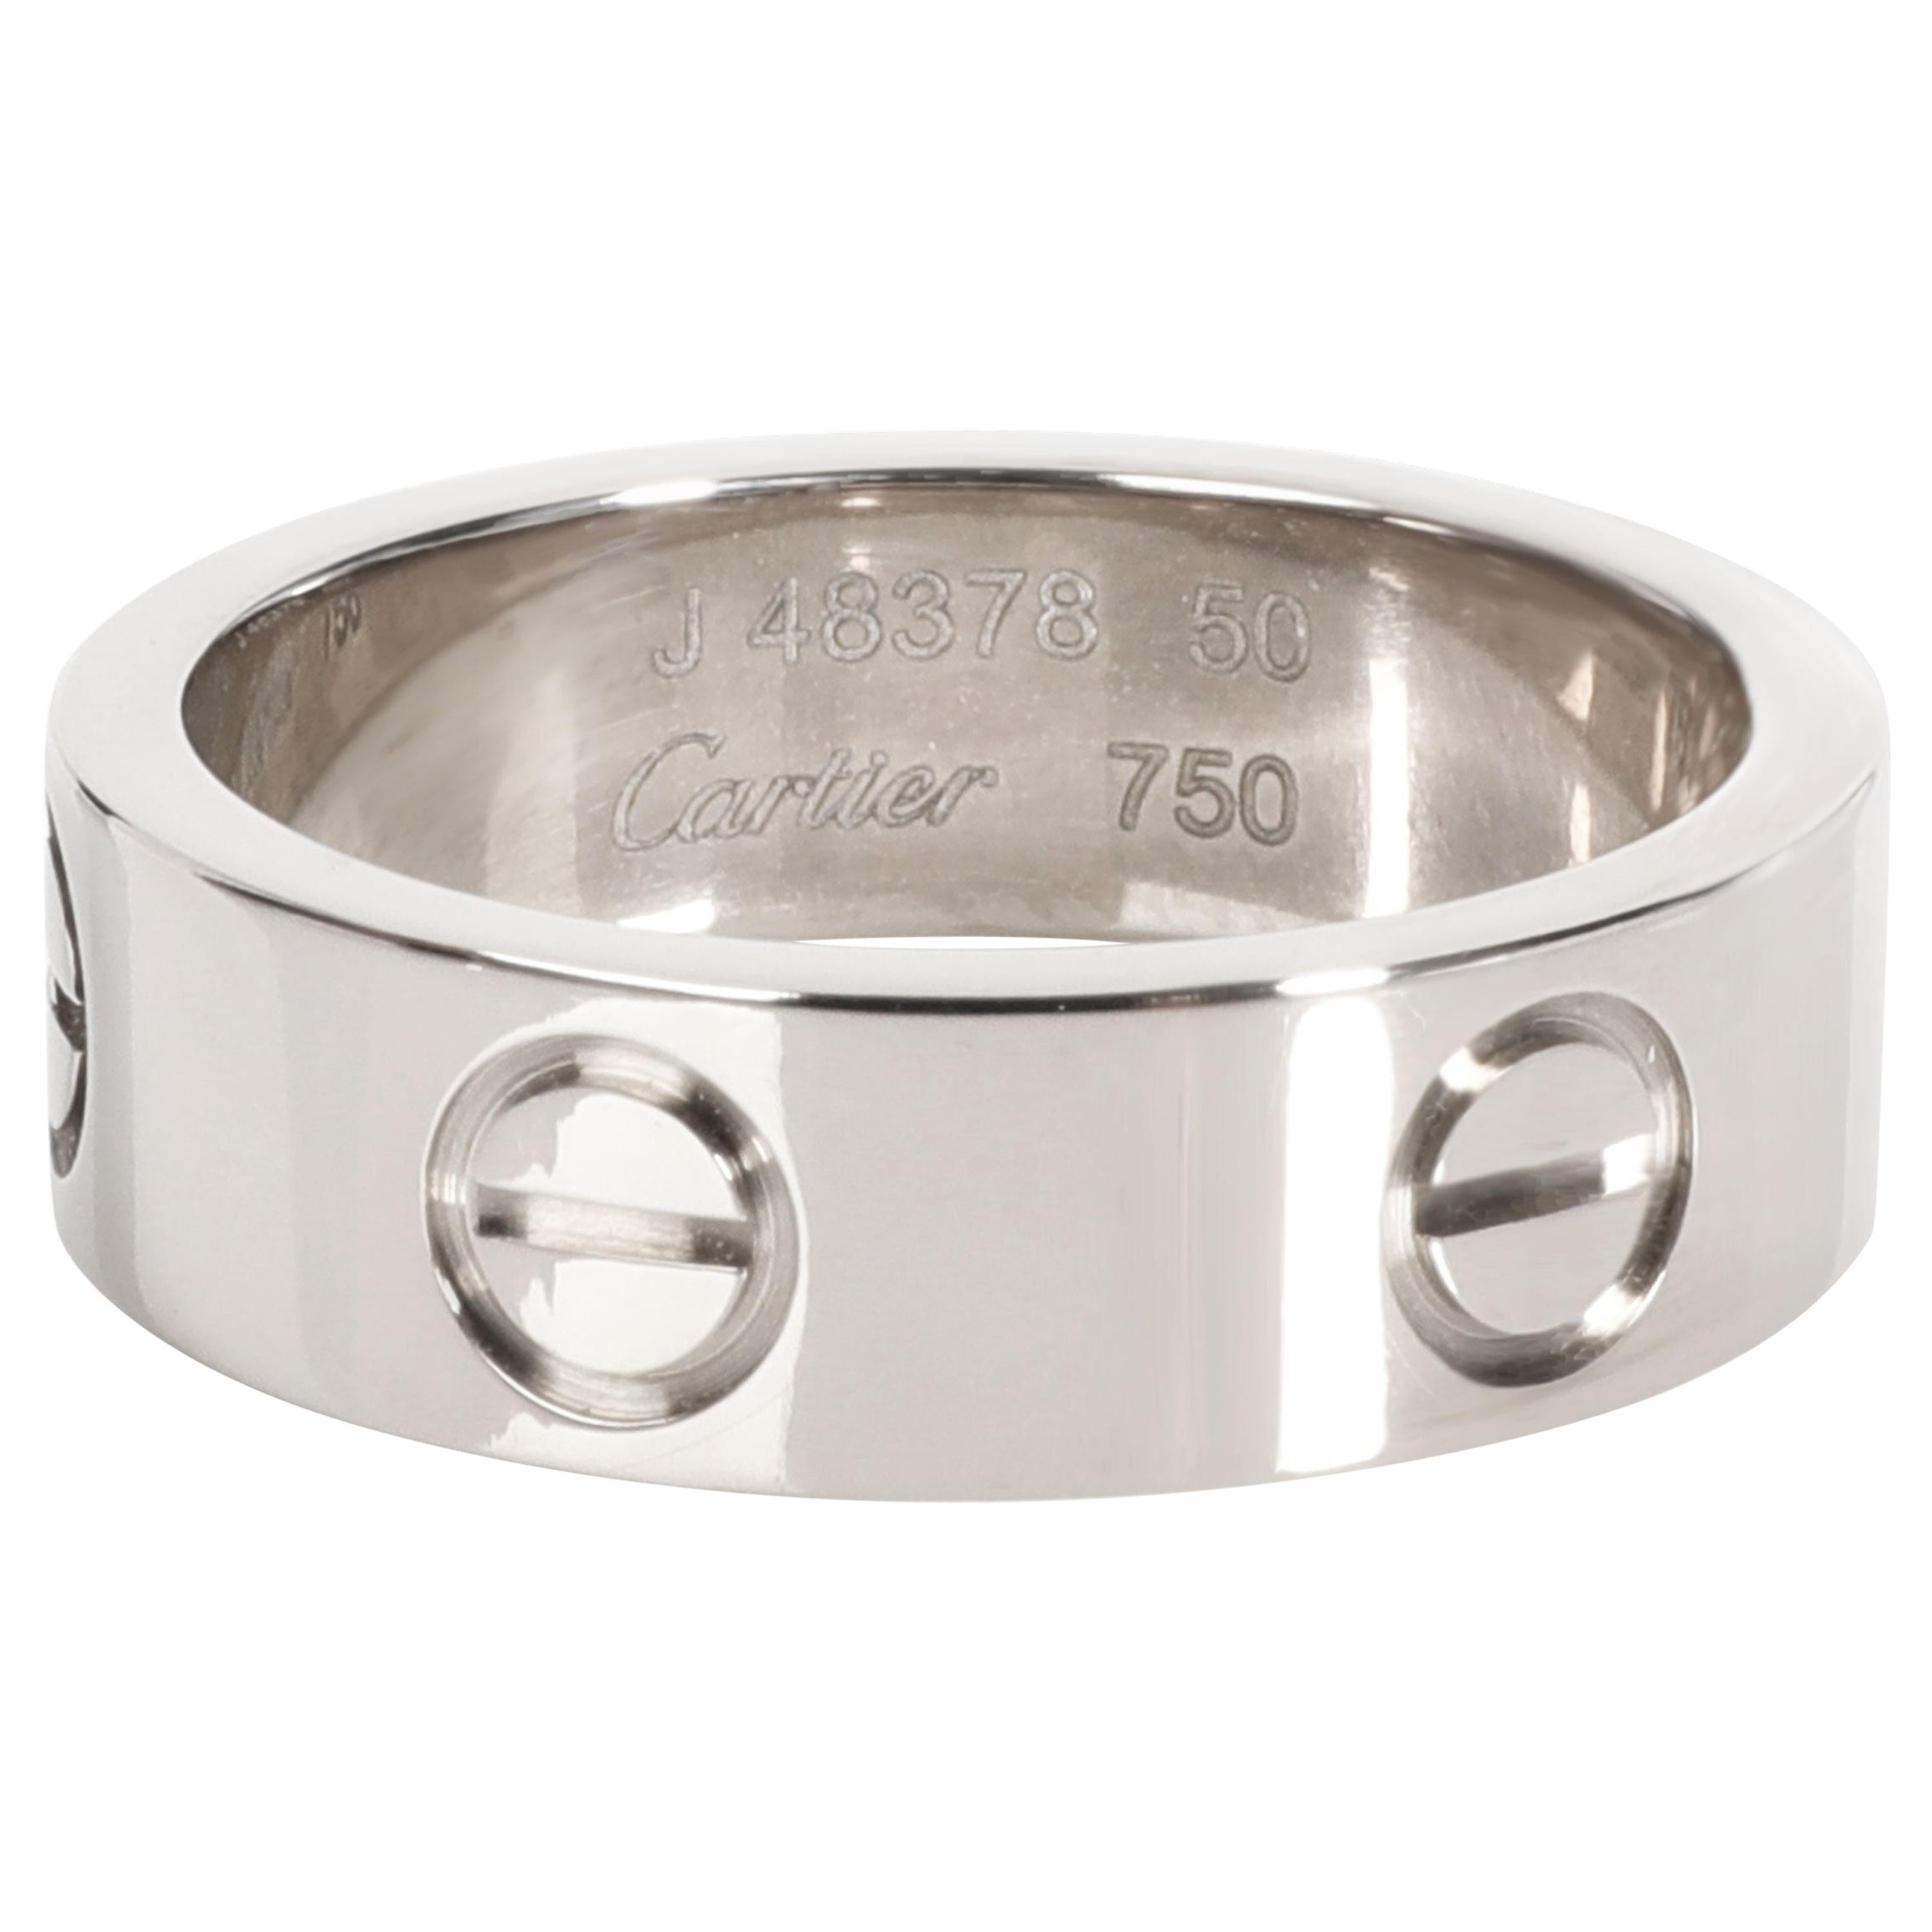 Cartier LOVE Ring in 18K White Gold